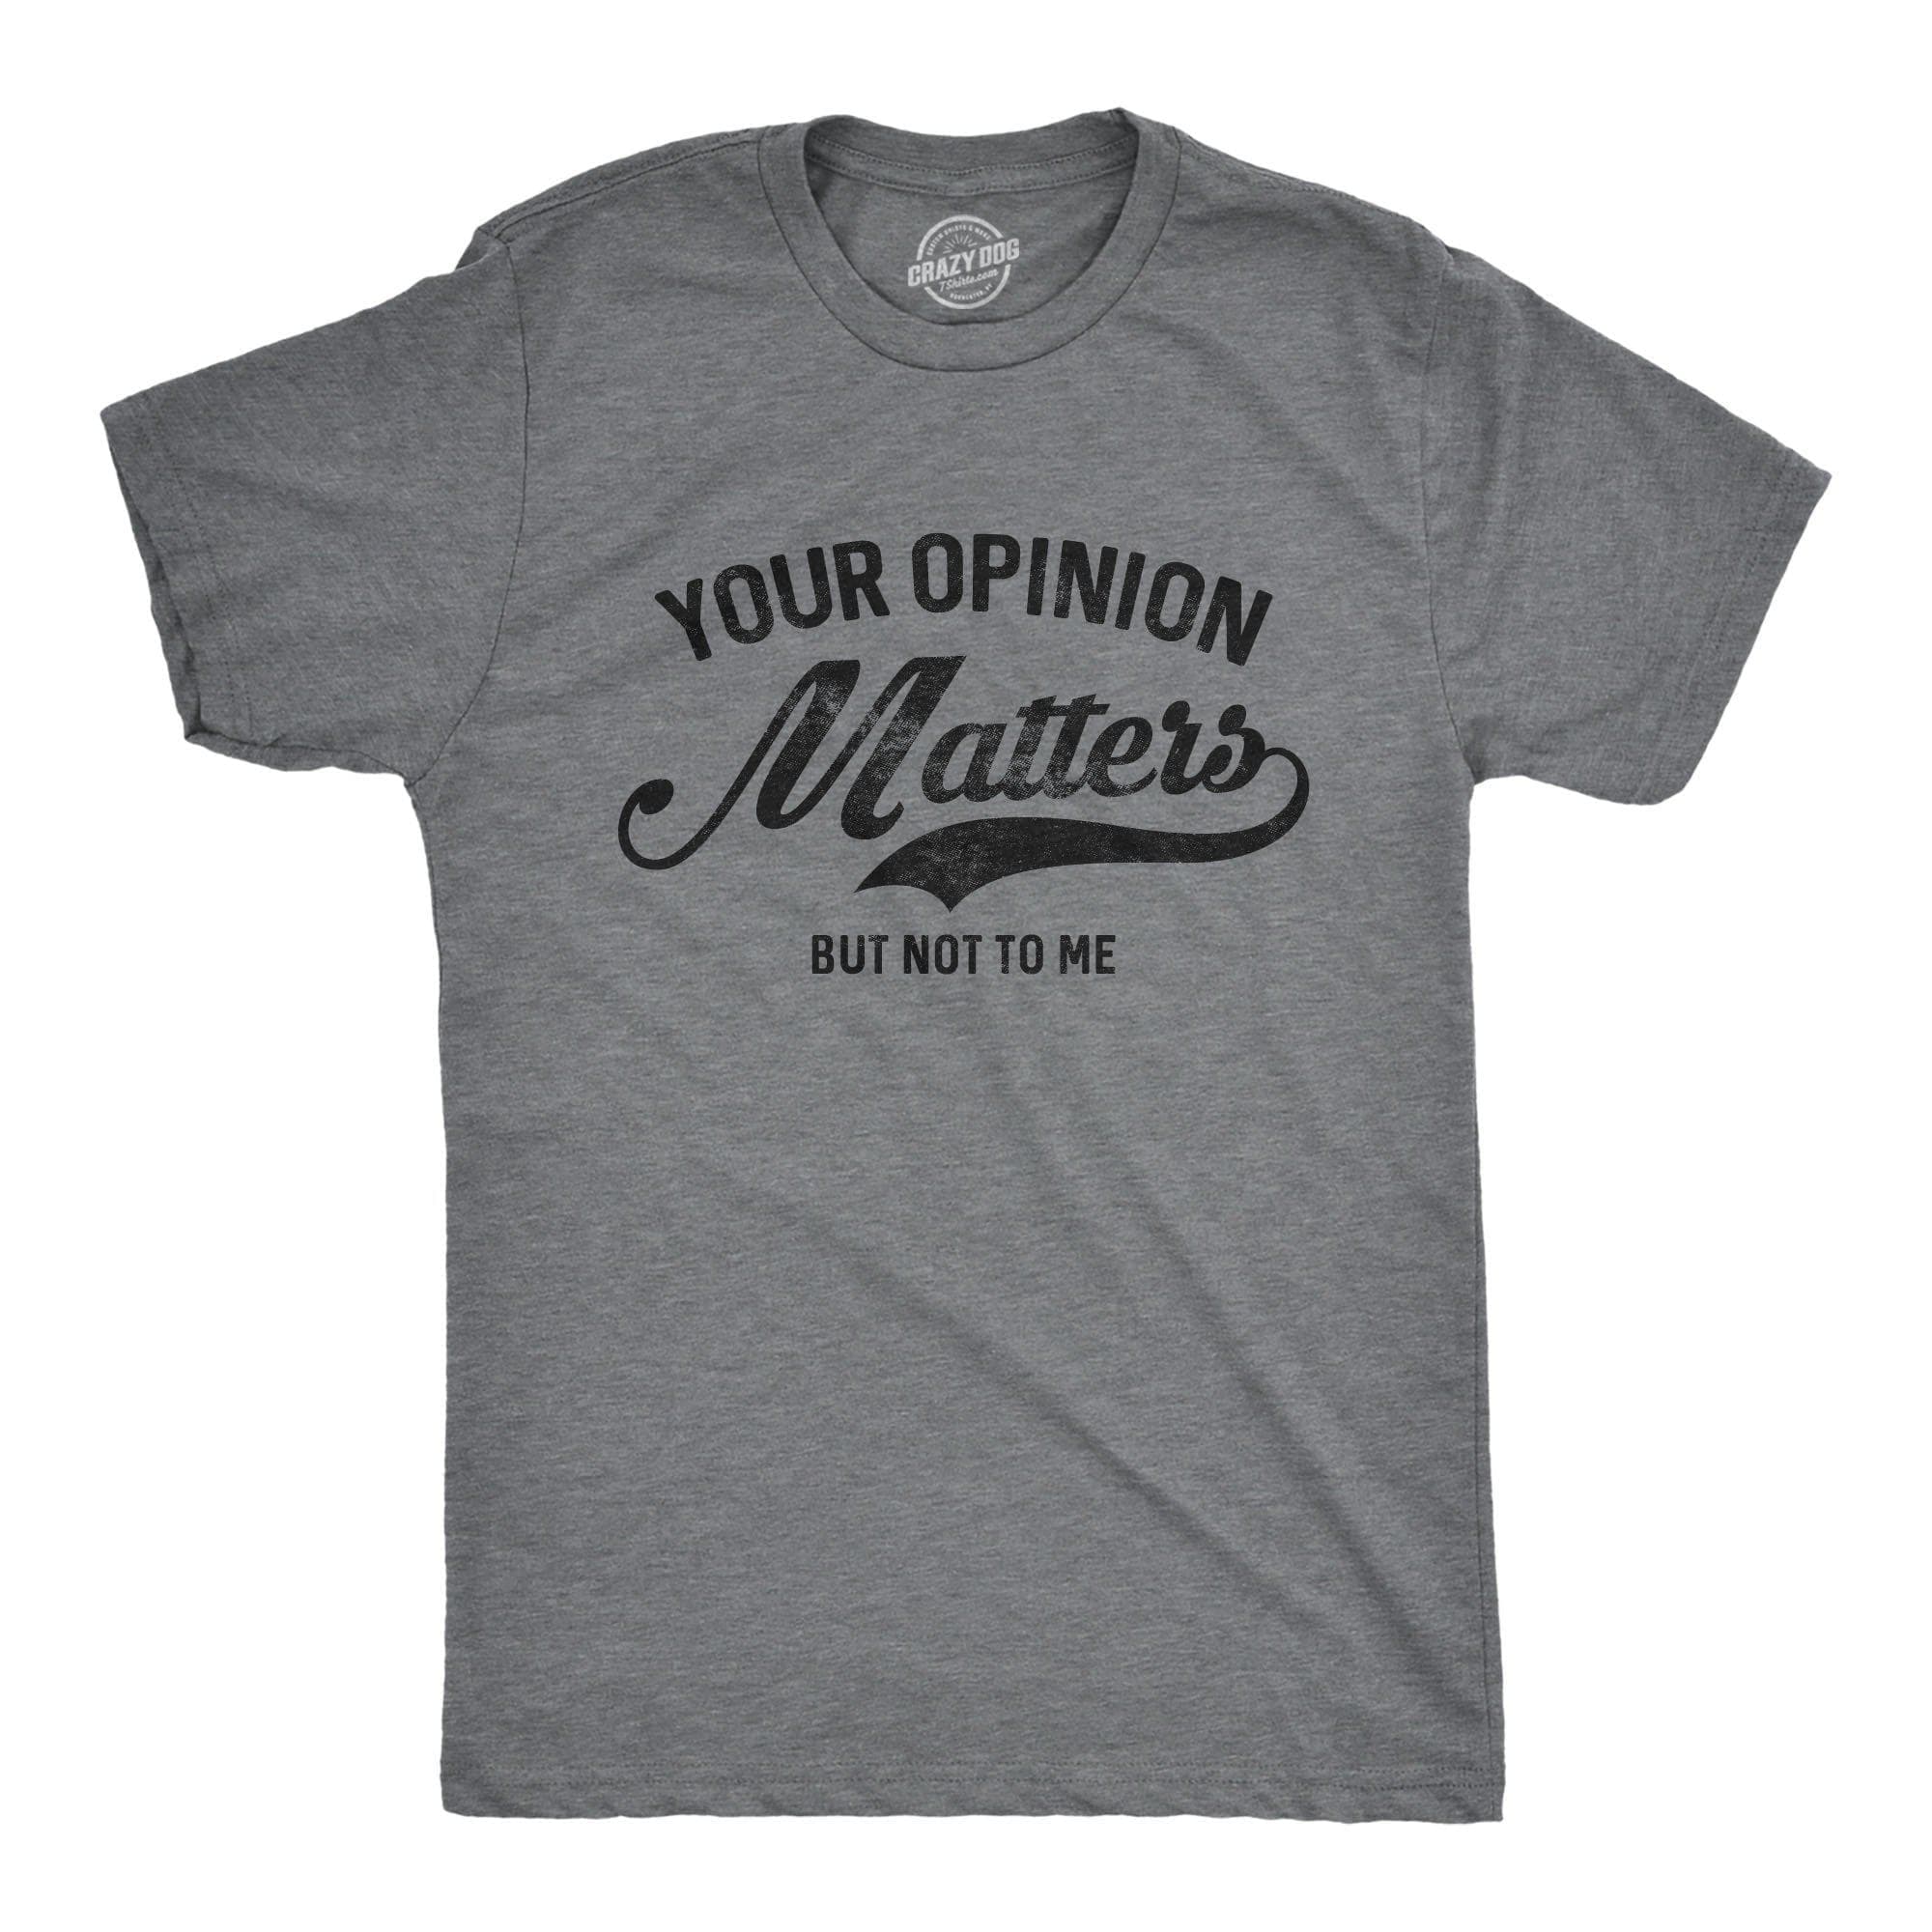 Your Opinion Matters Men's Tshirt - Crazy Dog T-Shirts